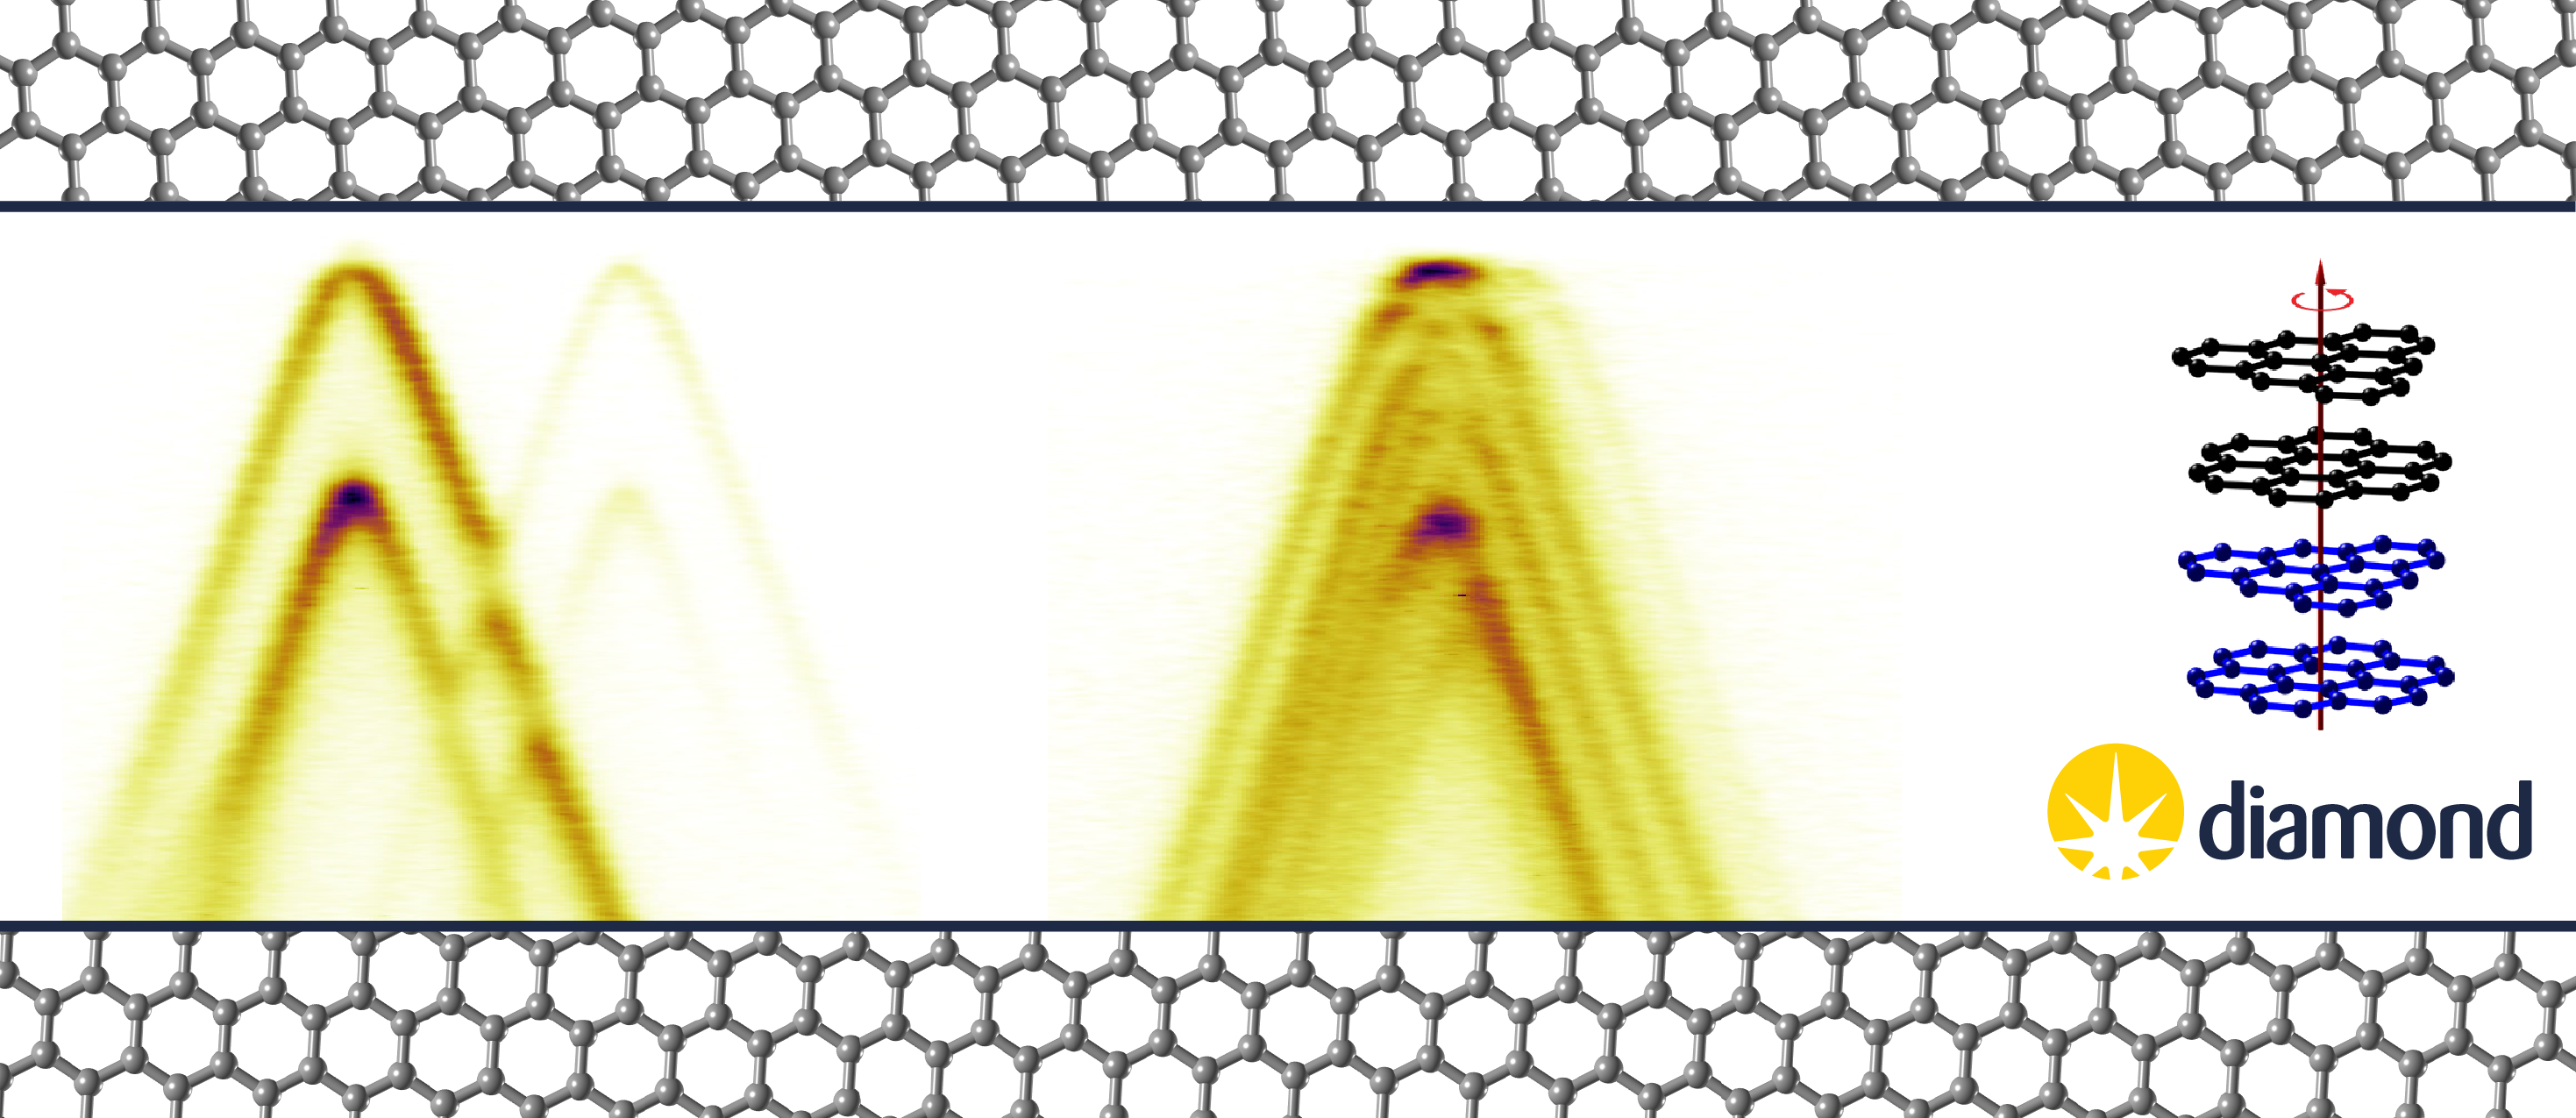 Matt-01.png<br/>Fig. 1: Electronic structures of twisted double bilayer graphene at large (left) and "magic" (centre) twist angles, showing the emergence of a flat band at the top, which is at the heart of the various phenomena that emerge in this system. Data measured at I05 at Diamond and reported in Nunn et al.<br/>Image credit: Matthew Watson